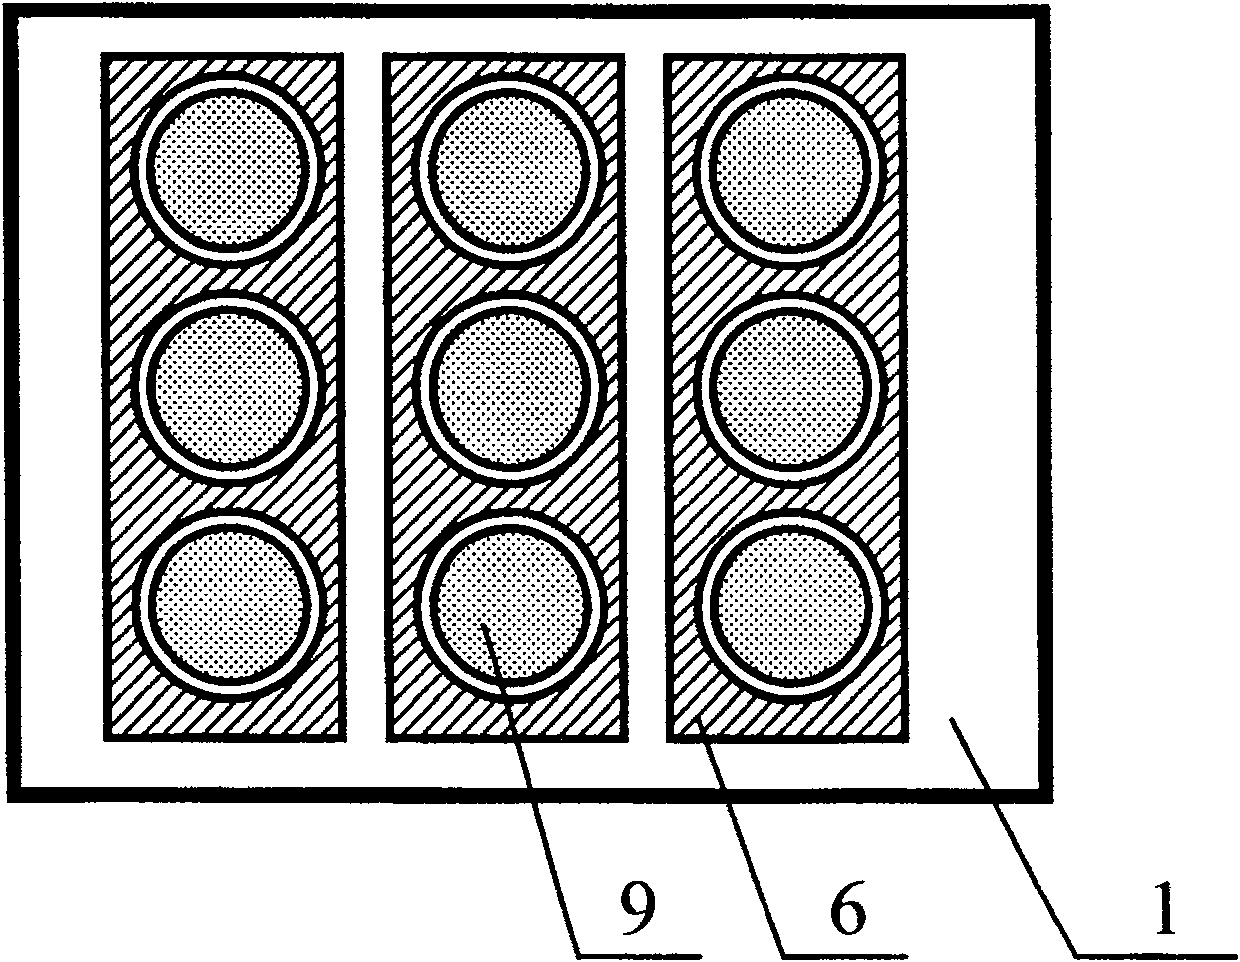 Flat board display of bevel cathode side-grid controlled structure and manufacturing process